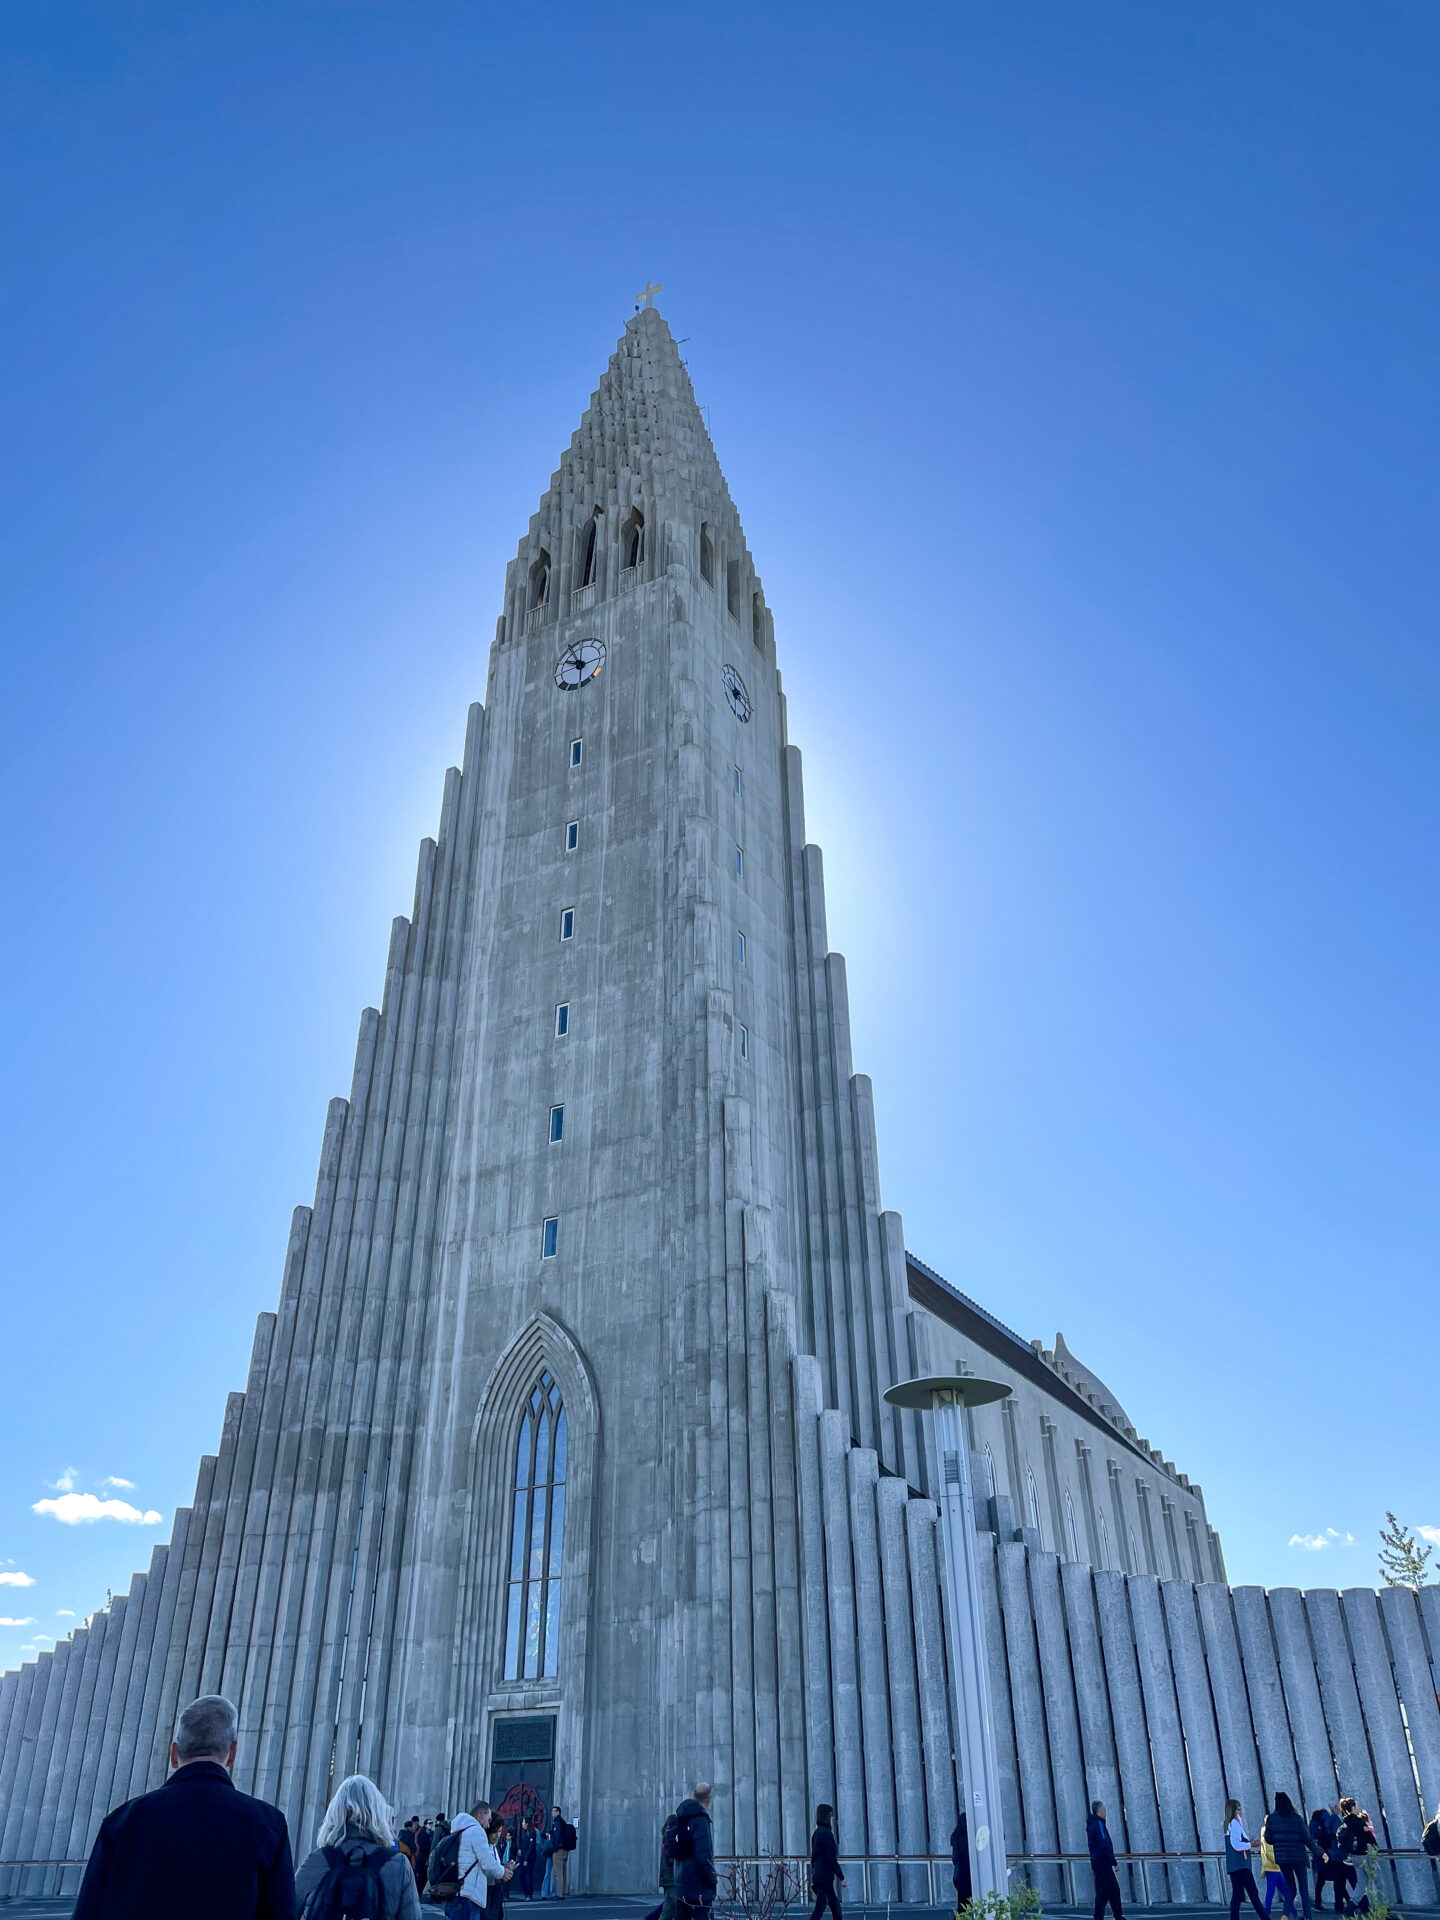 Hallgrimskirkja Church is a must do on any itinerary in Iceland